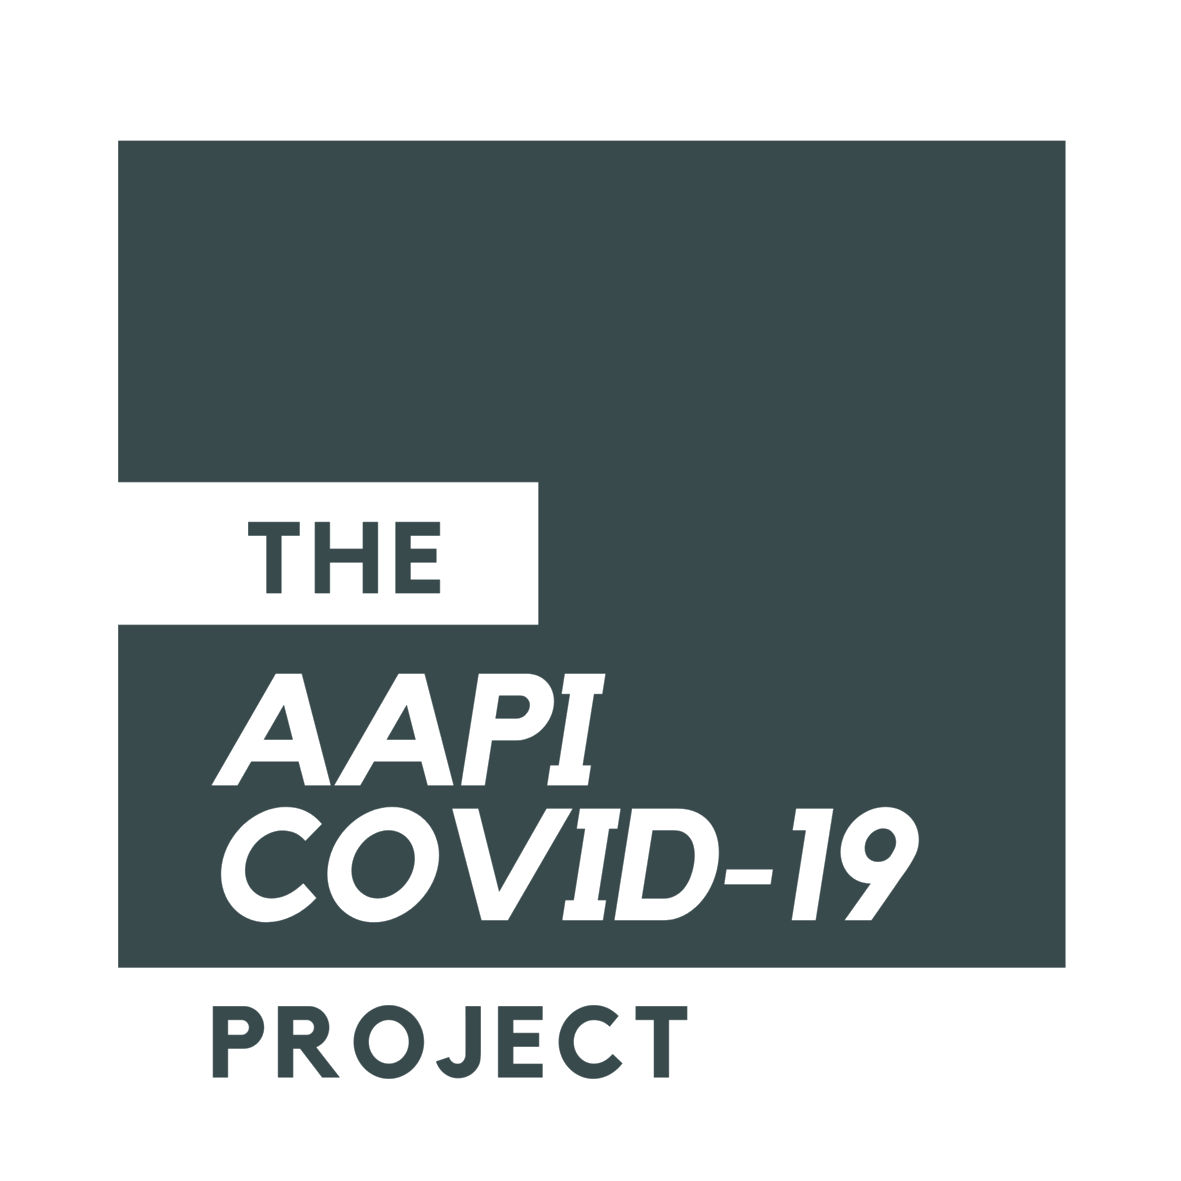 The AAPI COVID-19 Project